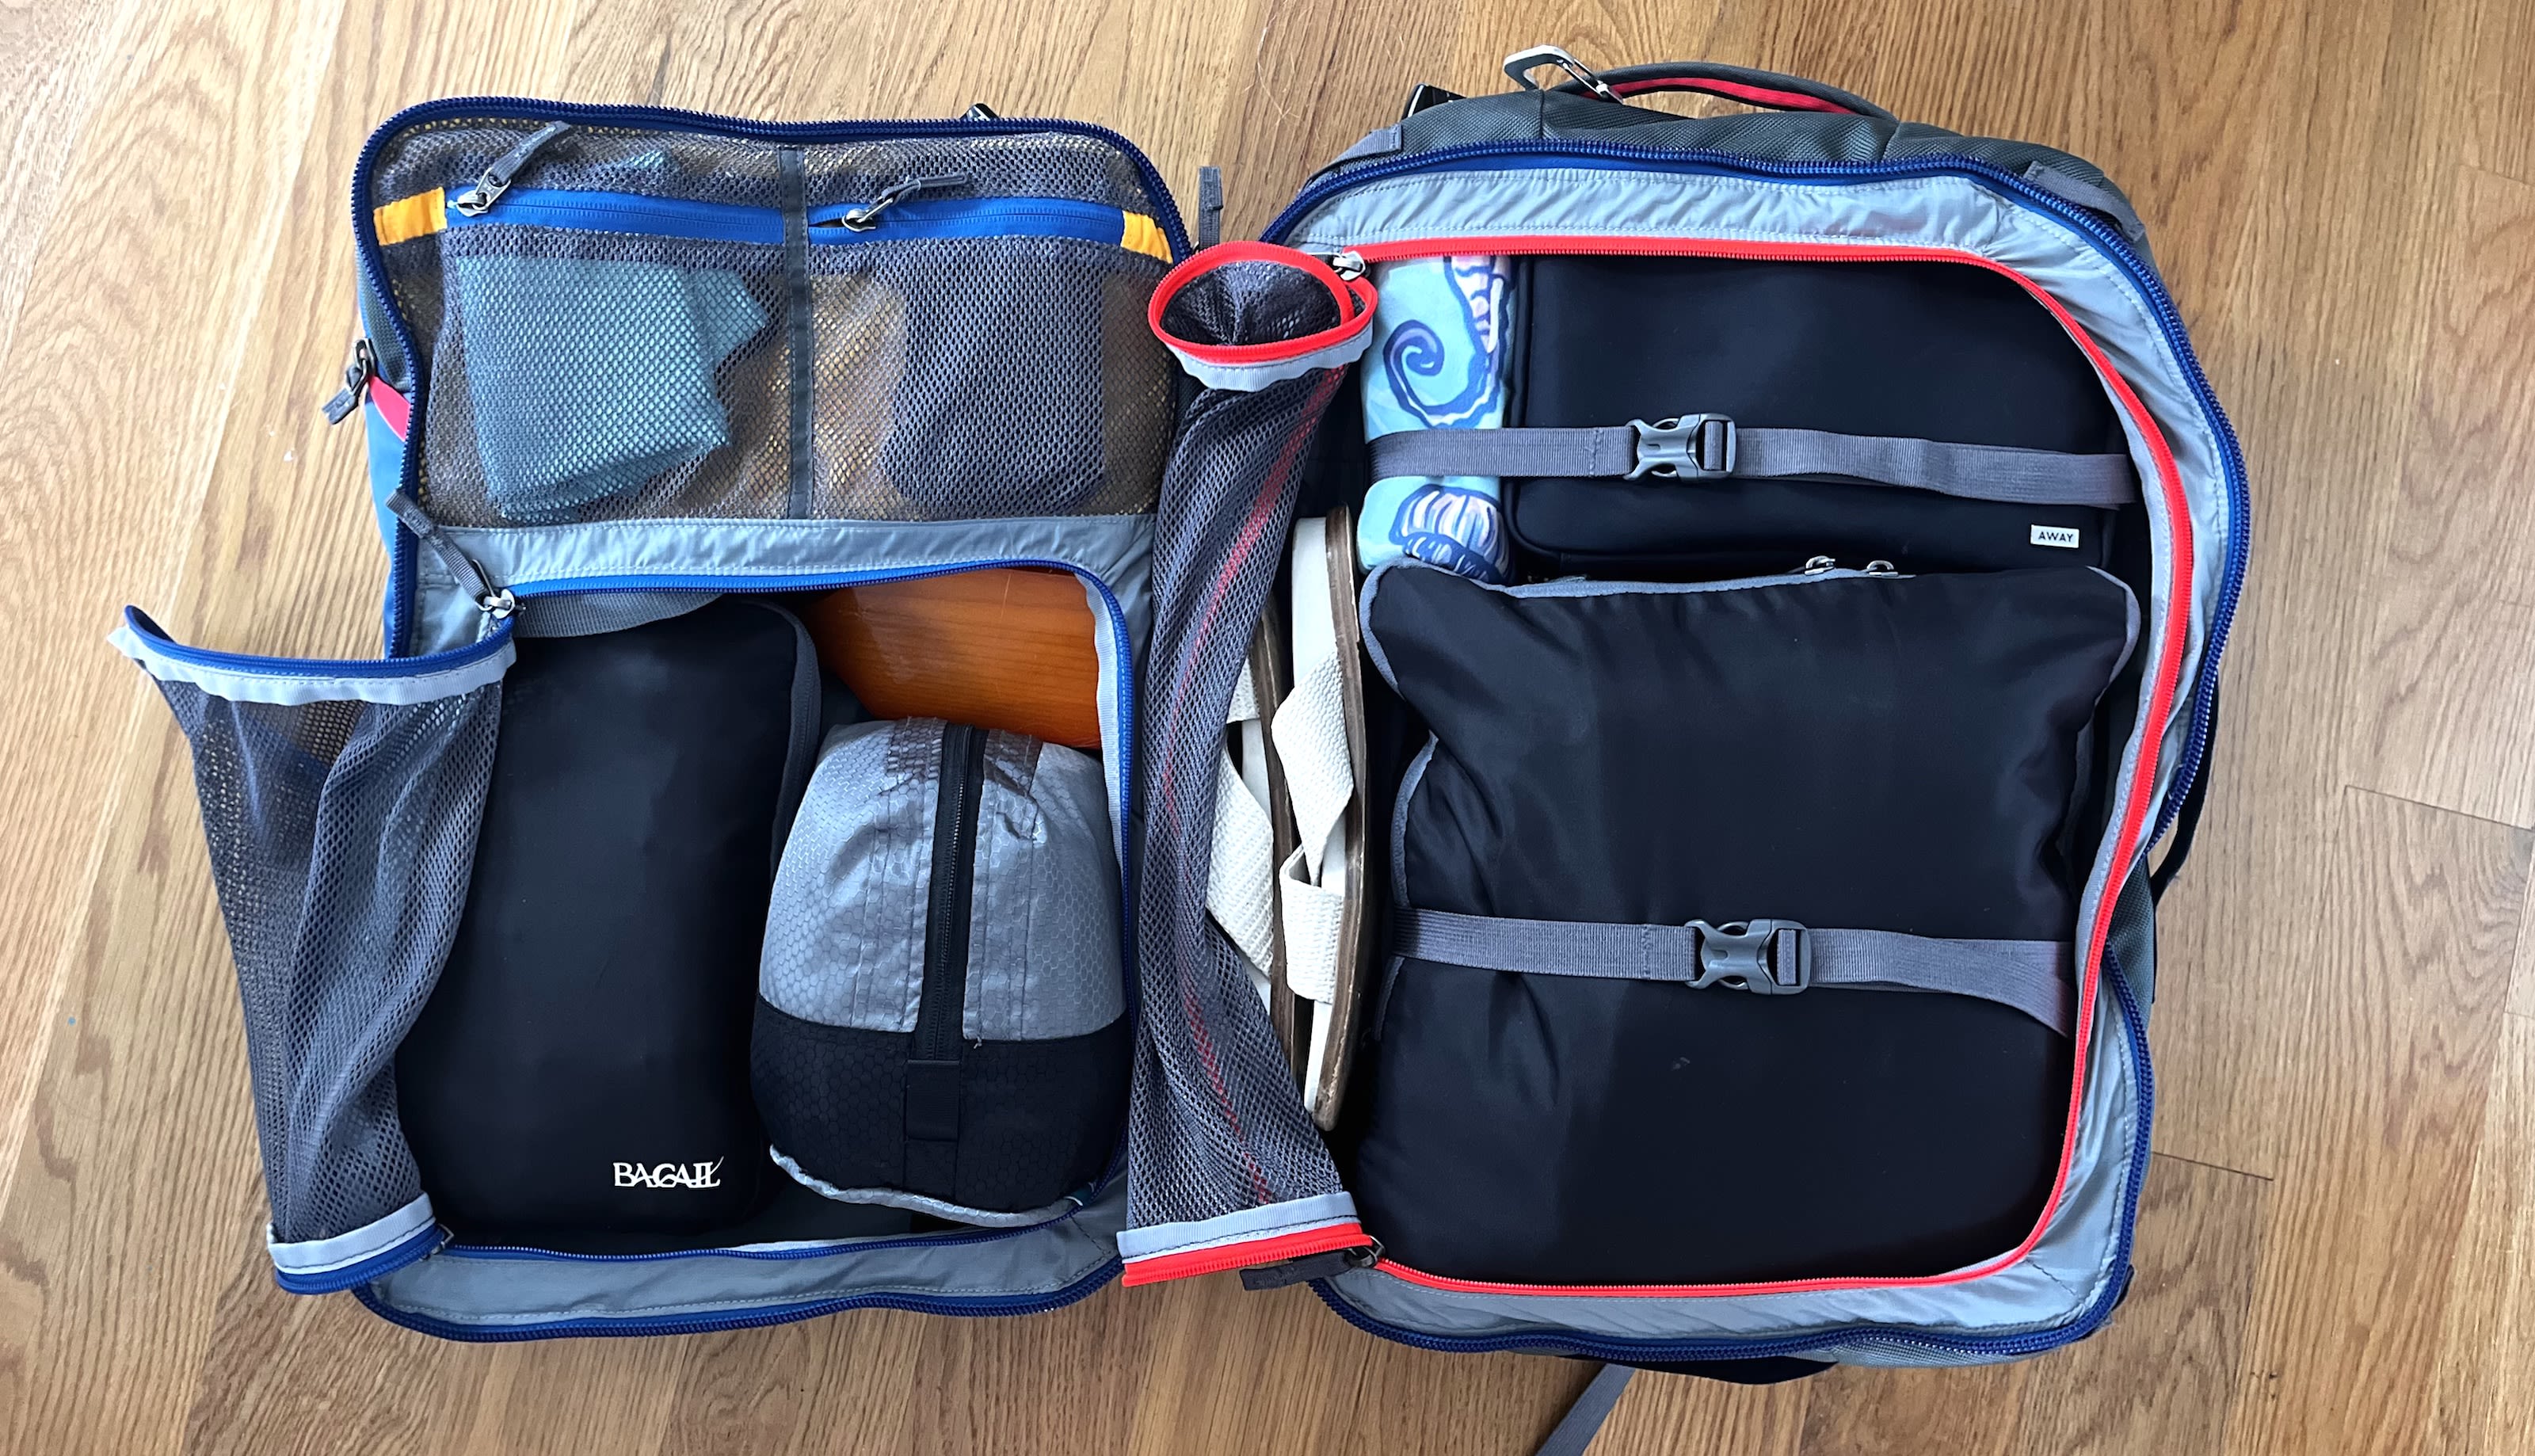 Backpack vs Rolling Luggage: What to Choose for a Long Bus Trip?